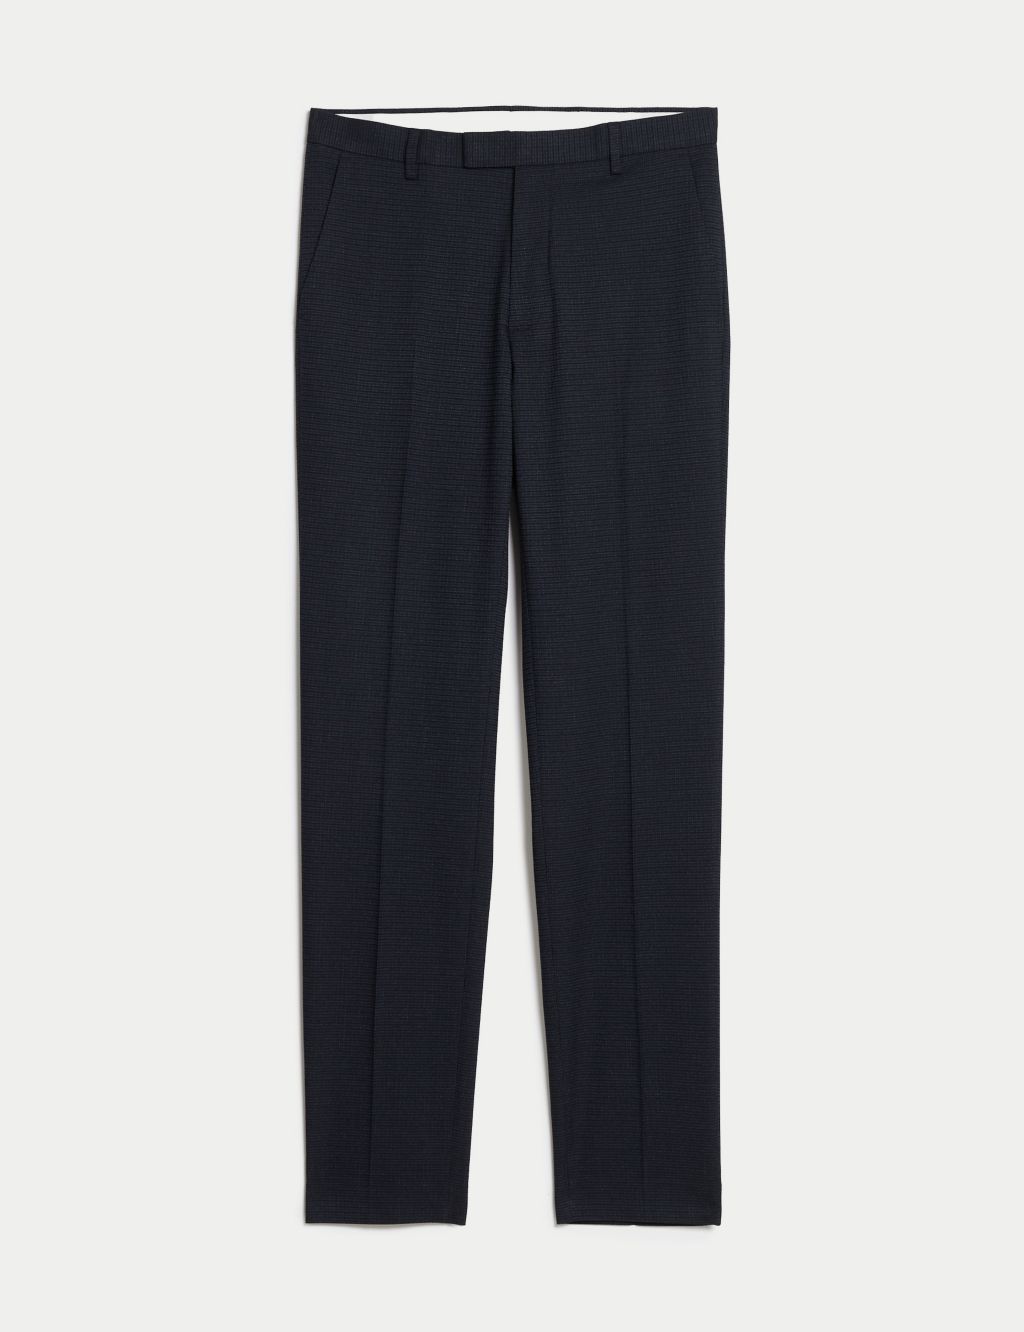 Textured Stretch Trousers | M&S Collection | M&S